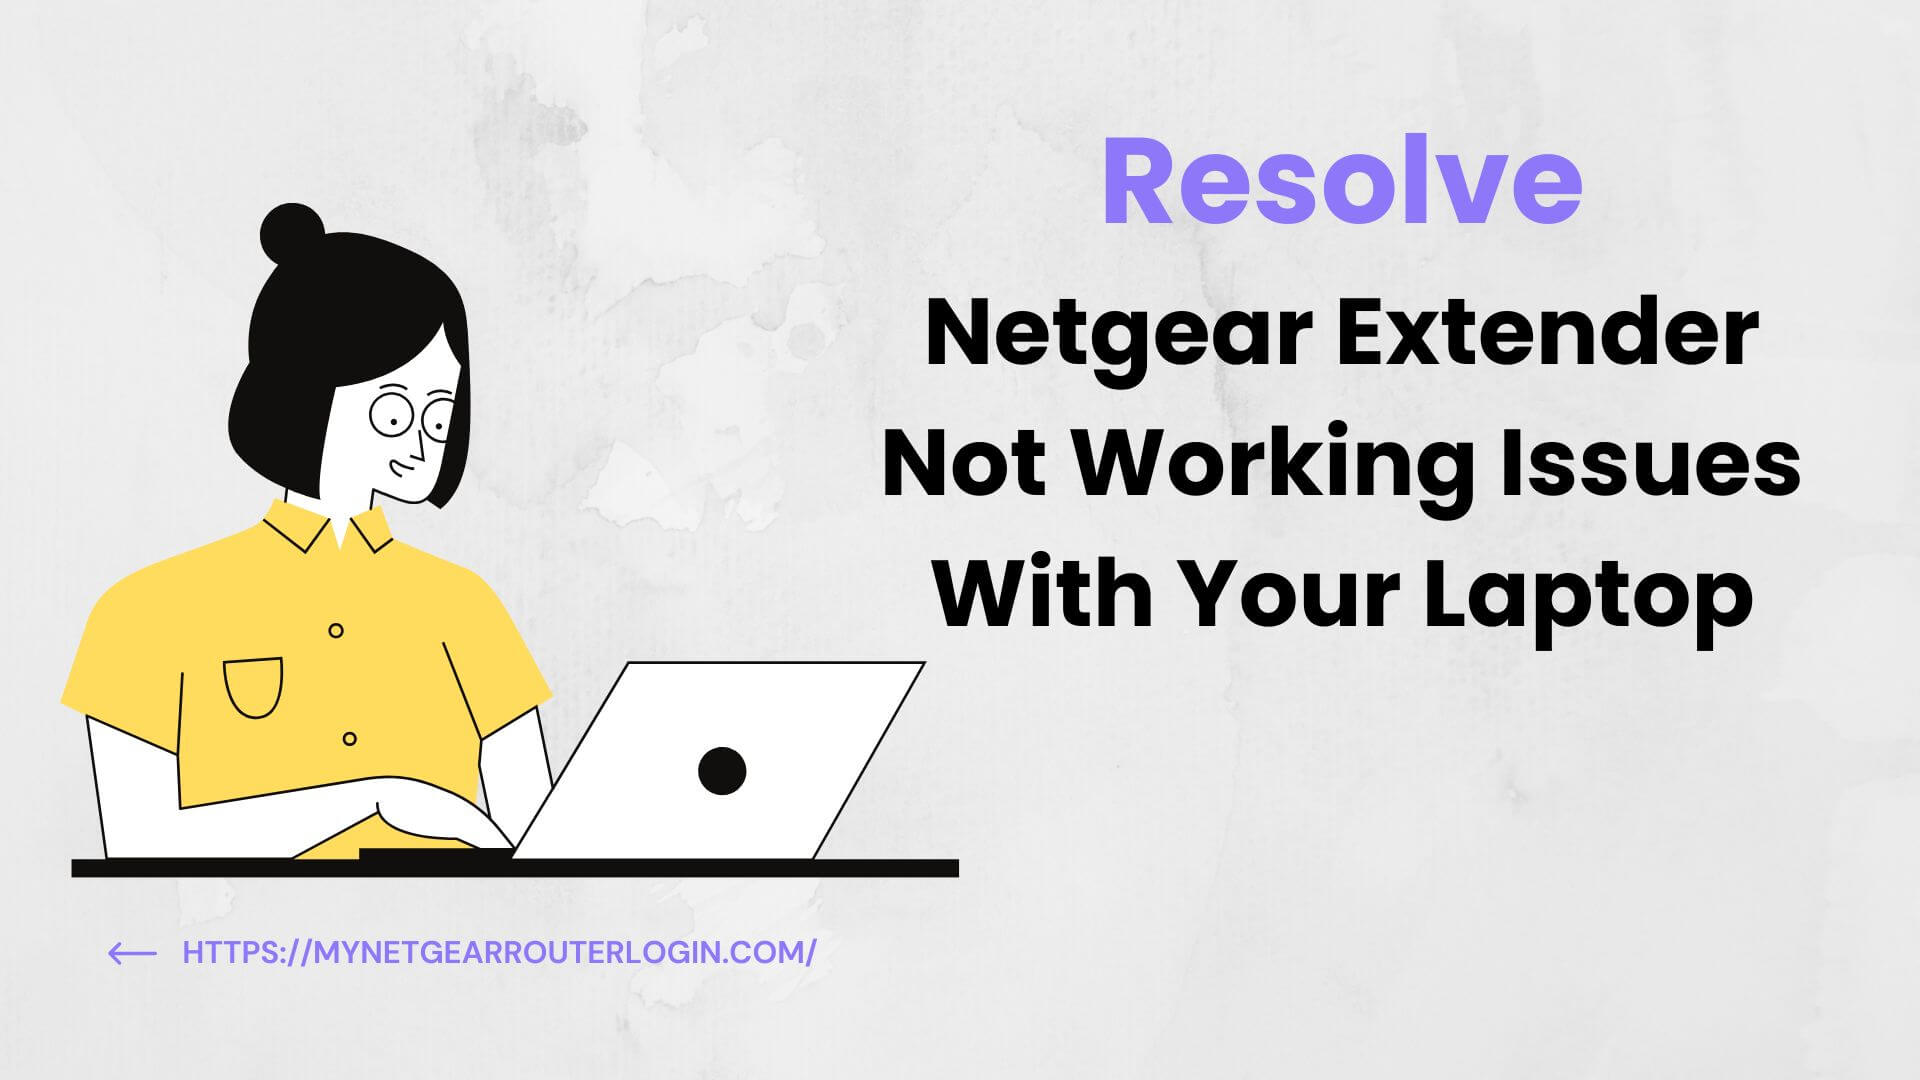 How to Fix Netgear Extender Not Working with Laptop Issue